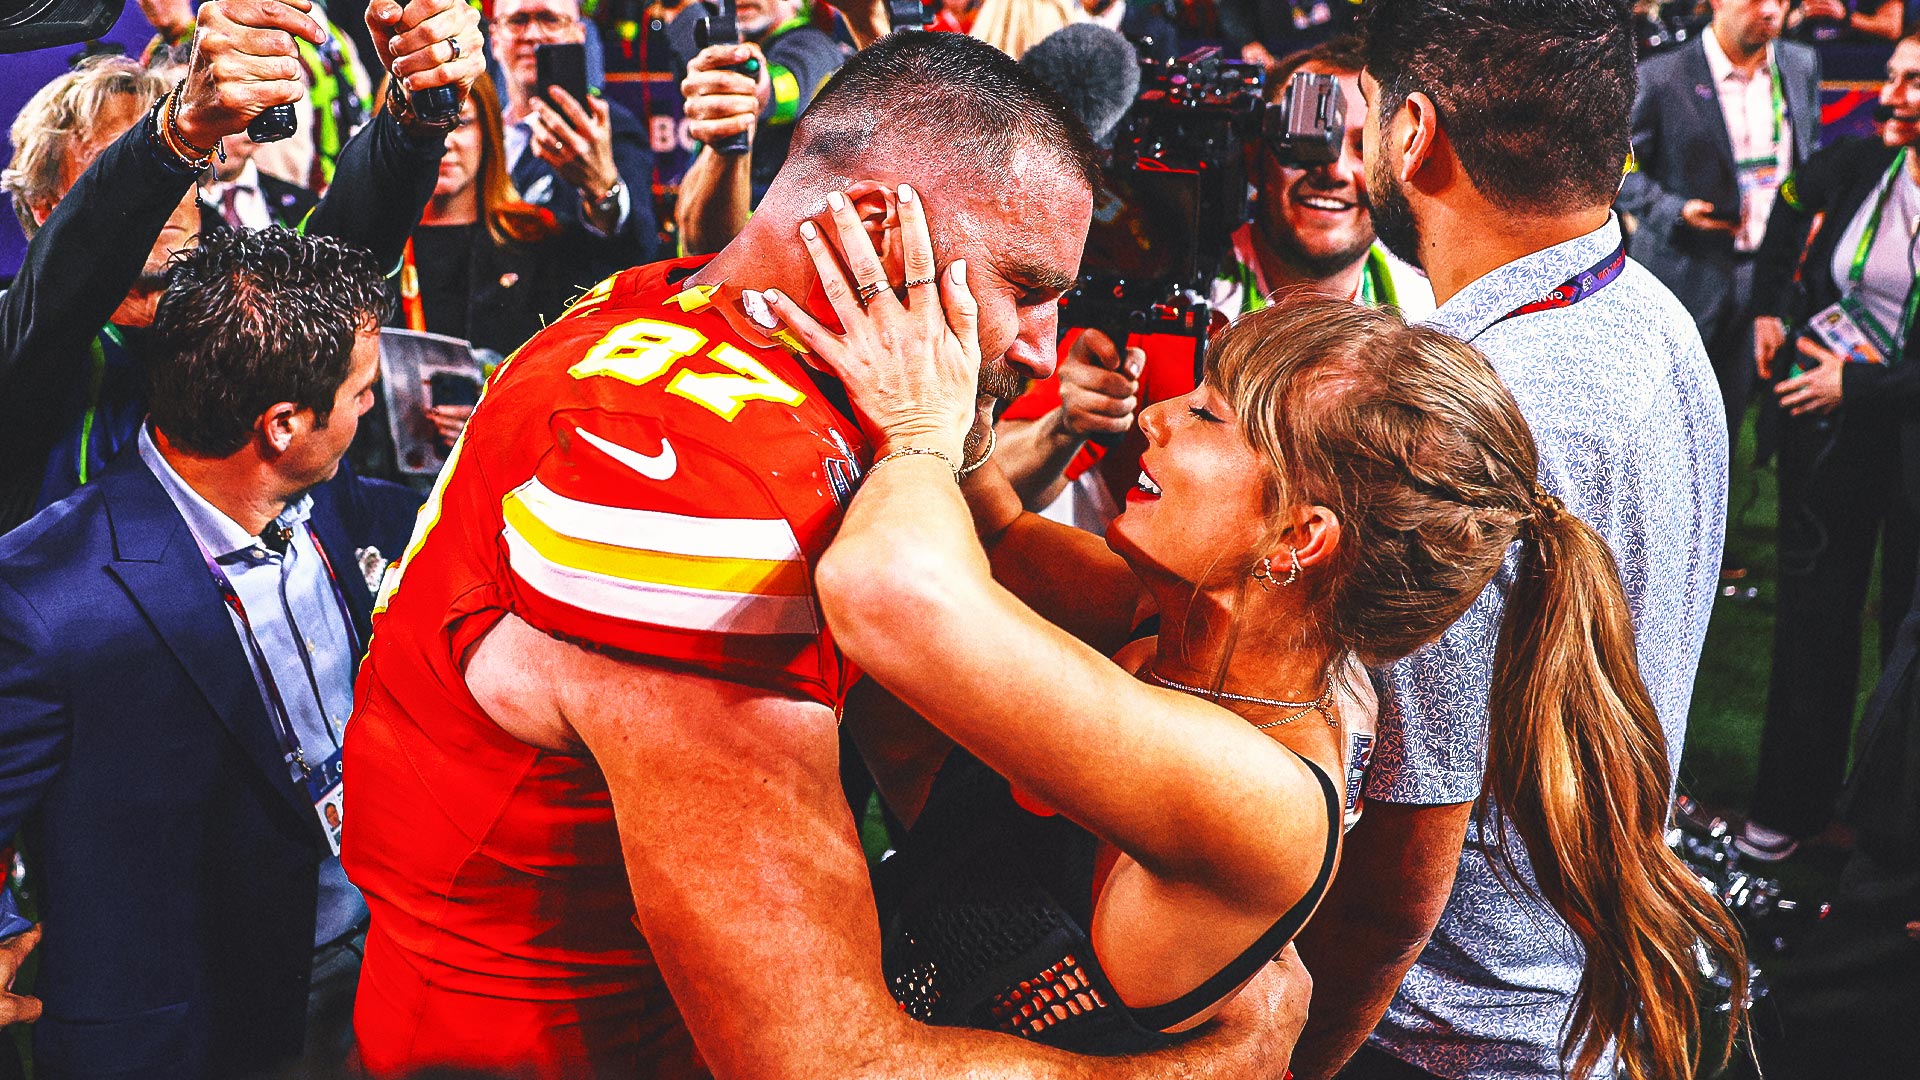 Chiefs fans hoping Taylor Swift attends victory parade, but her schedule is tight